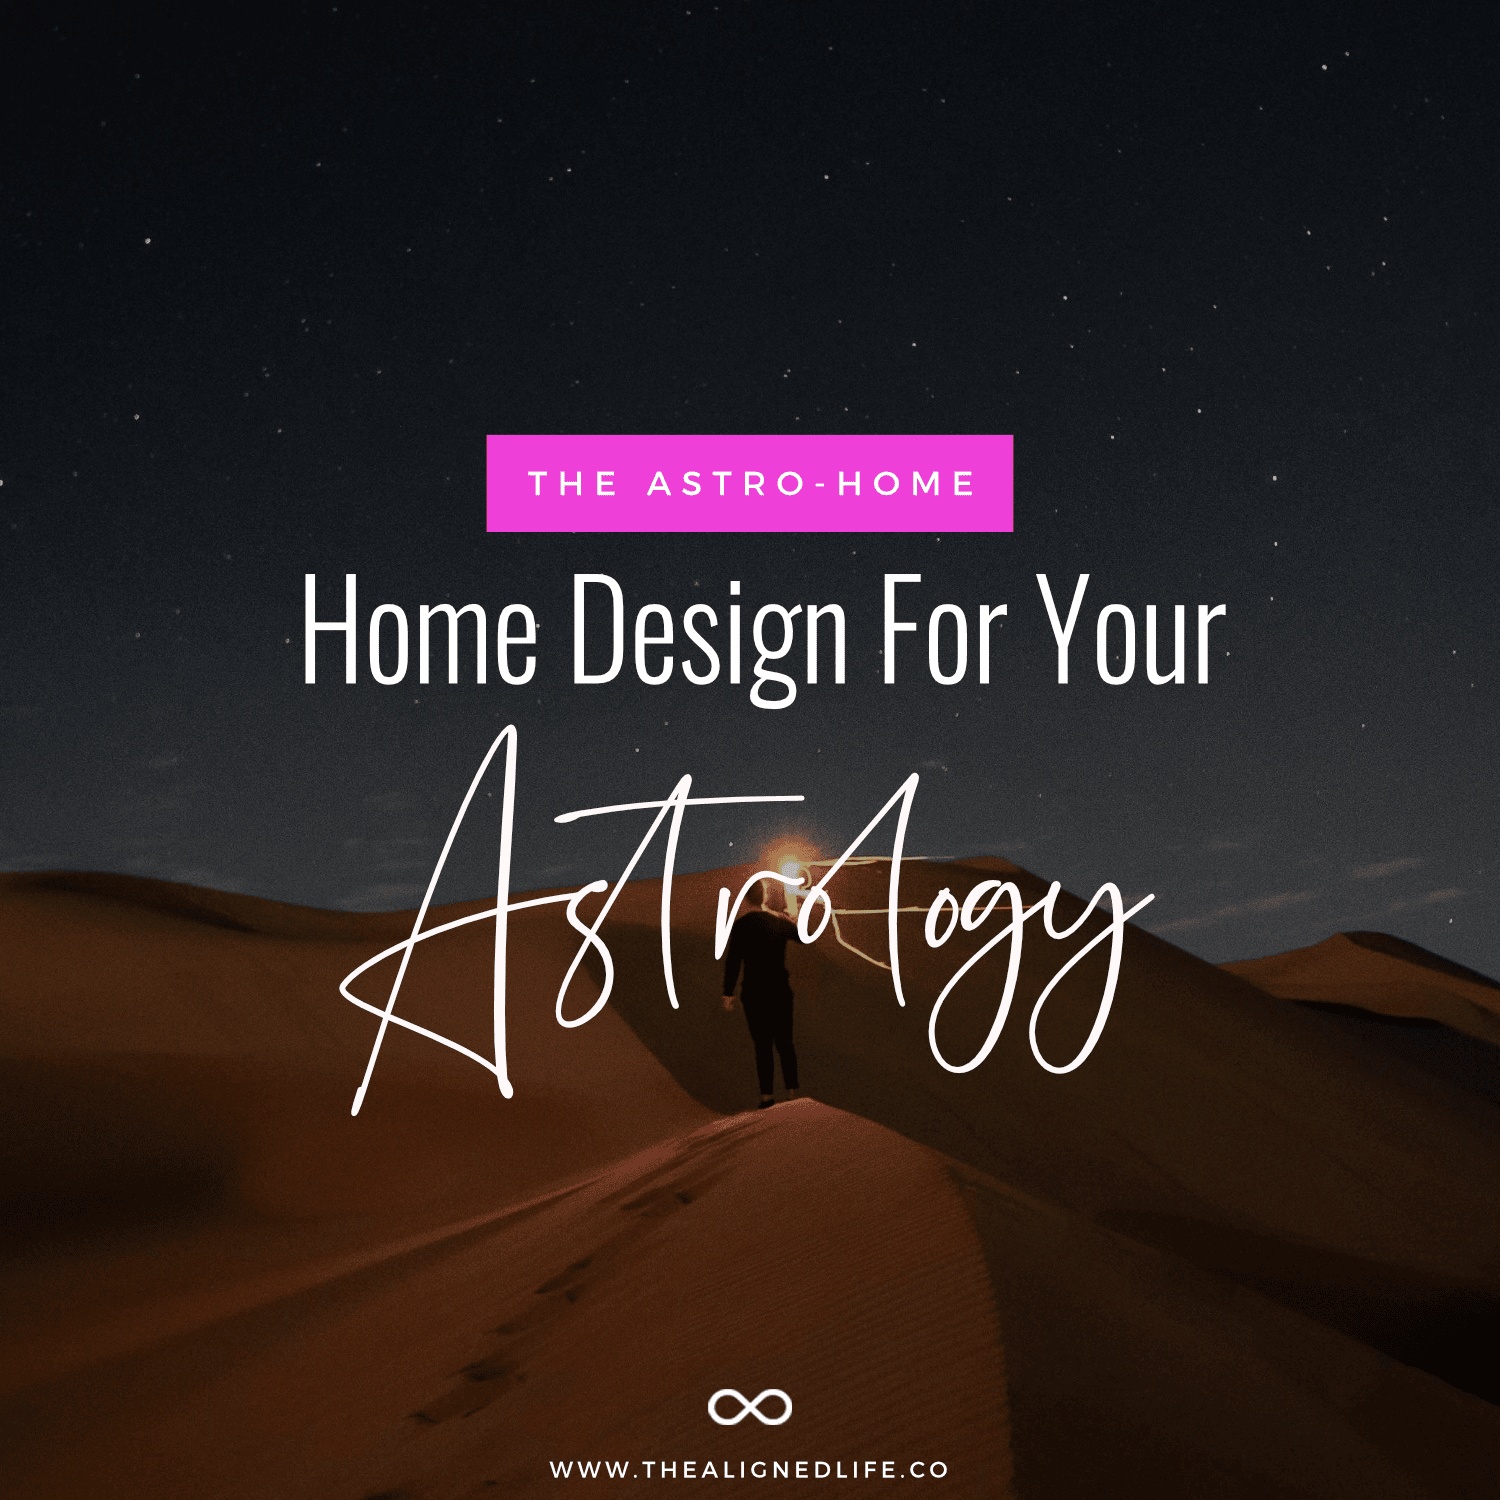 The AstroHome - Design For Your Astrological Sign